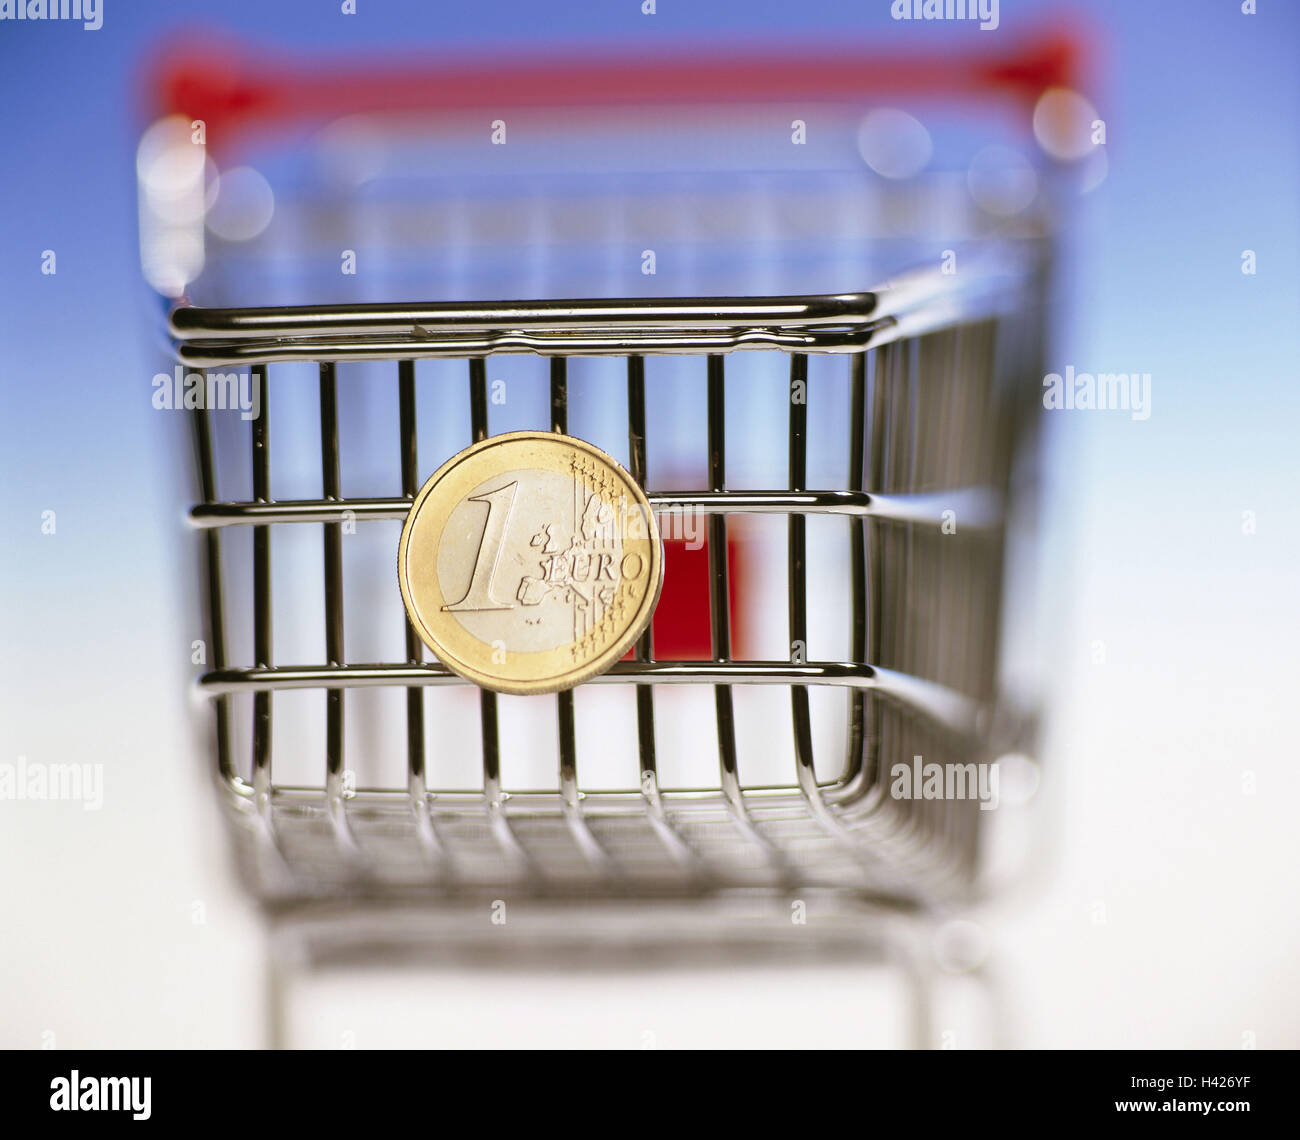 Shopping carts, euro coin miniature shopping cart, euro, coin, currency, Europe, means payment, European, value, buying power, finances, economy, consumption, purchasing, shop, carriage security, icon, conception, Still life, product photography, blur, st Stock Photo